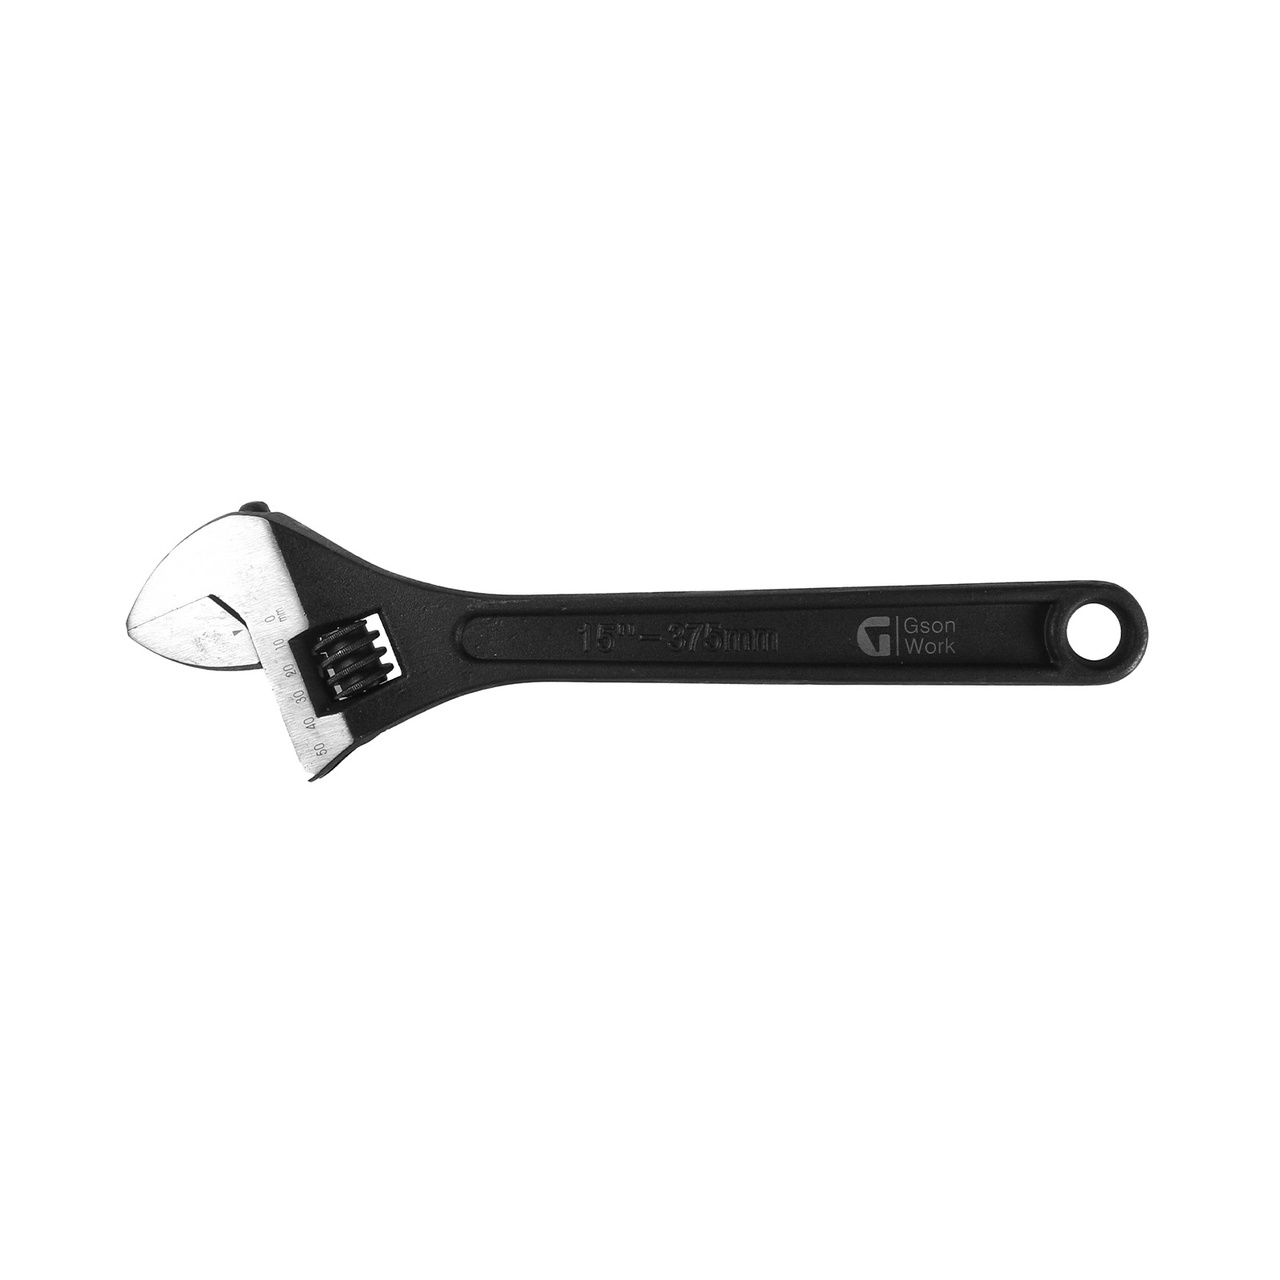 Adjustable Wrench 6" / 150 mm